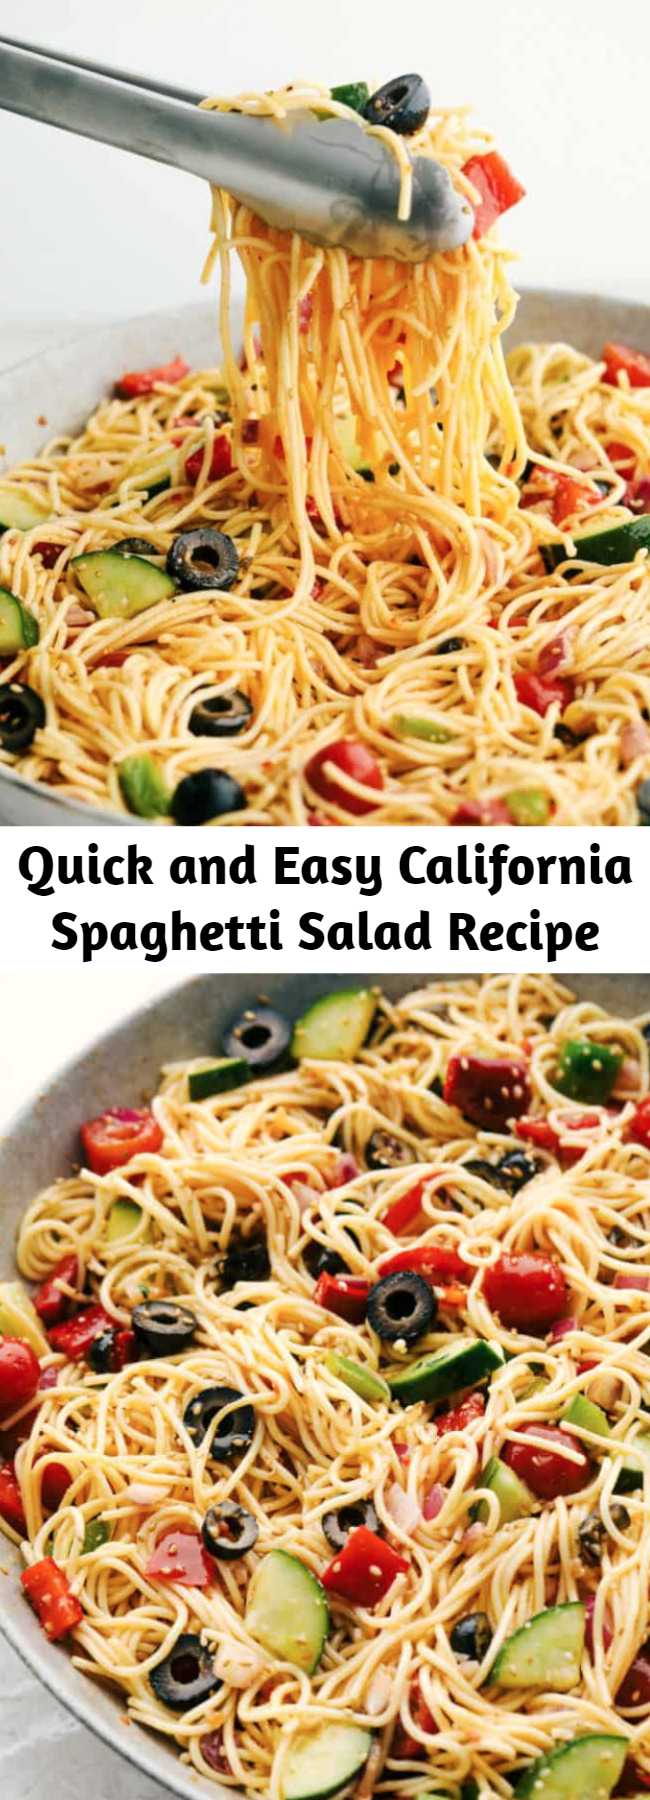 Quick and Easy California Spaghetti Salad Recipe - A delicious spaghetti salad filled with fresh summer veggies and olives. Topped with a zesty italian dressing and parmesan cheese, this will be the hit of your next gathering!